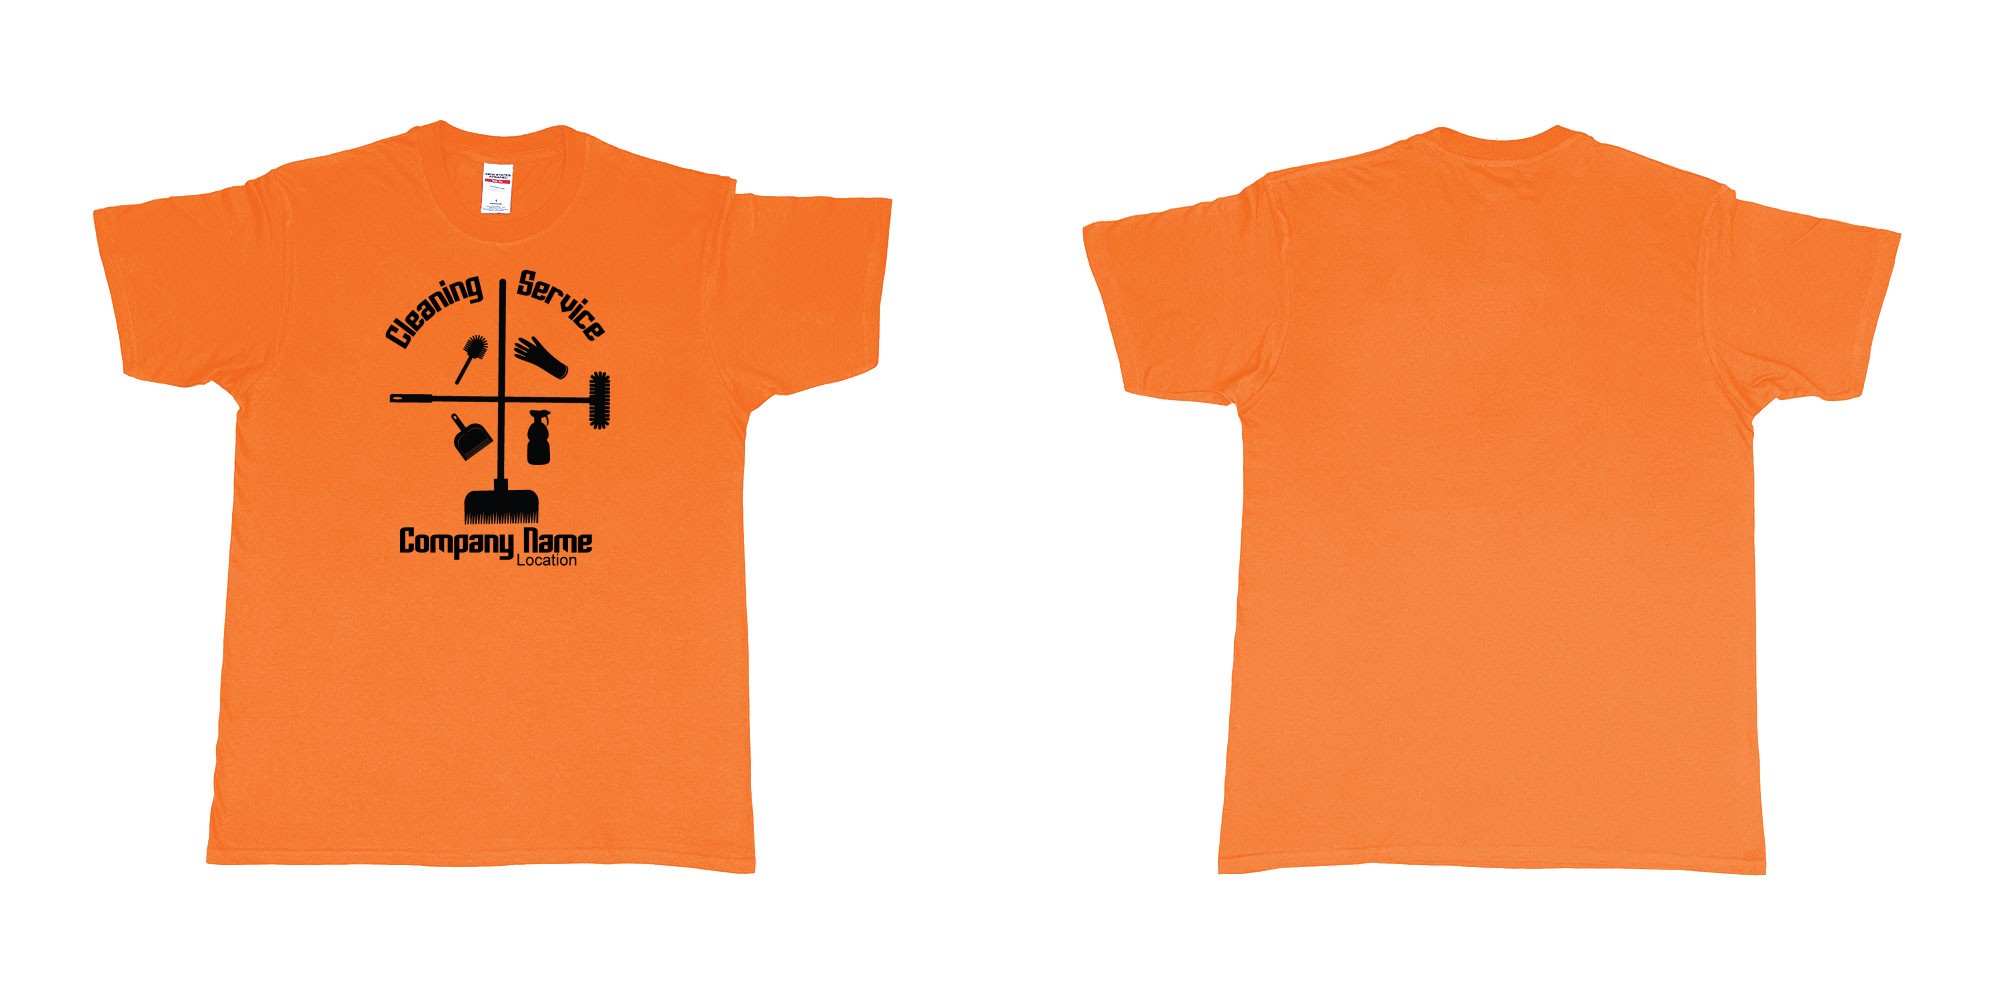 Custom tshirt design cleaning service own company name and location custom printing teeshirt bali design in fabric color orange choice your own text made in Bali by The Pirate Way